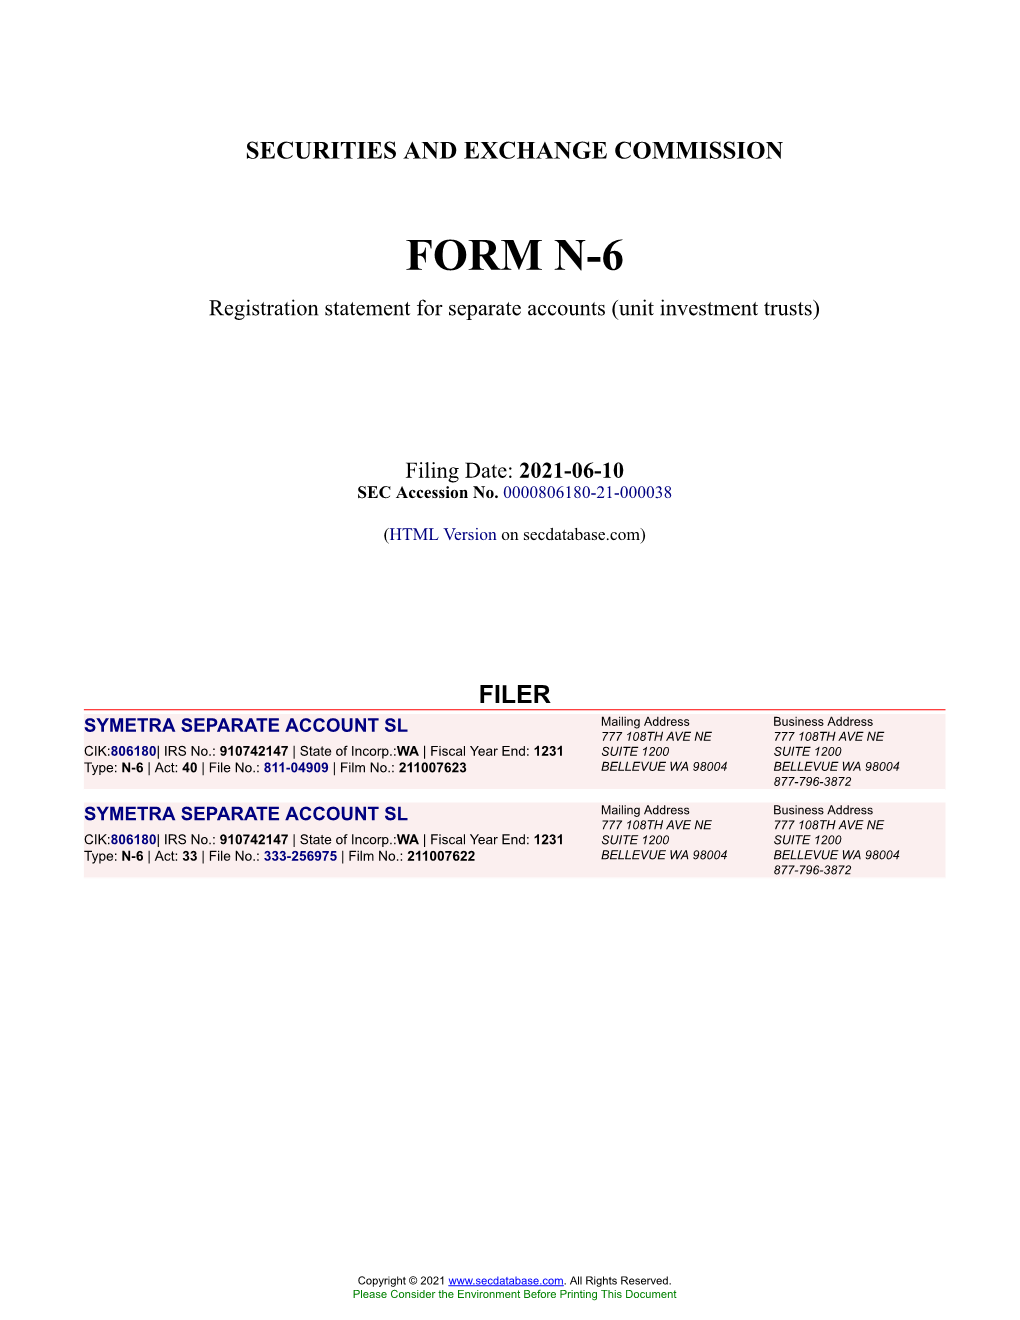 SYMETRA SEPARATE ACCOUNT SL Form N-6 Filed 2021-06-10